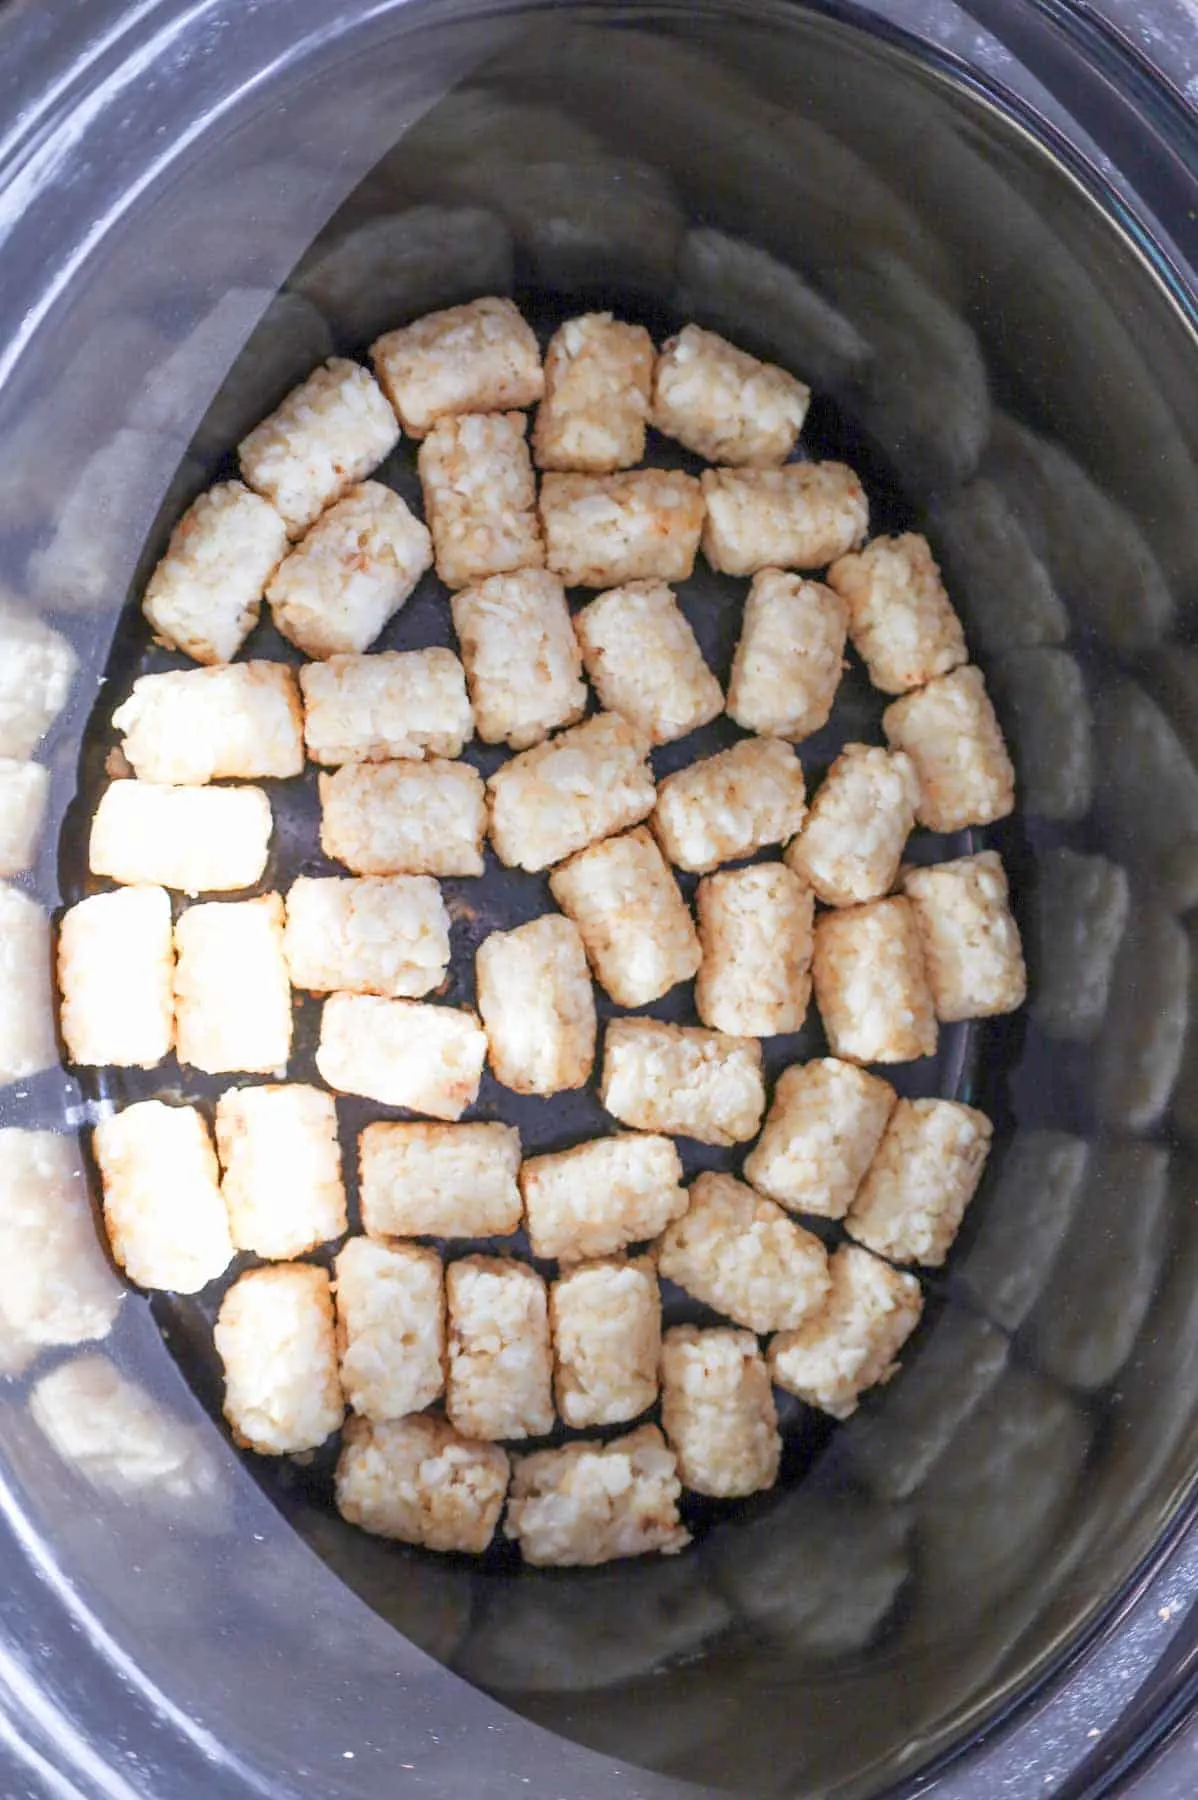 frozen tater tots in the bottom of crock pot